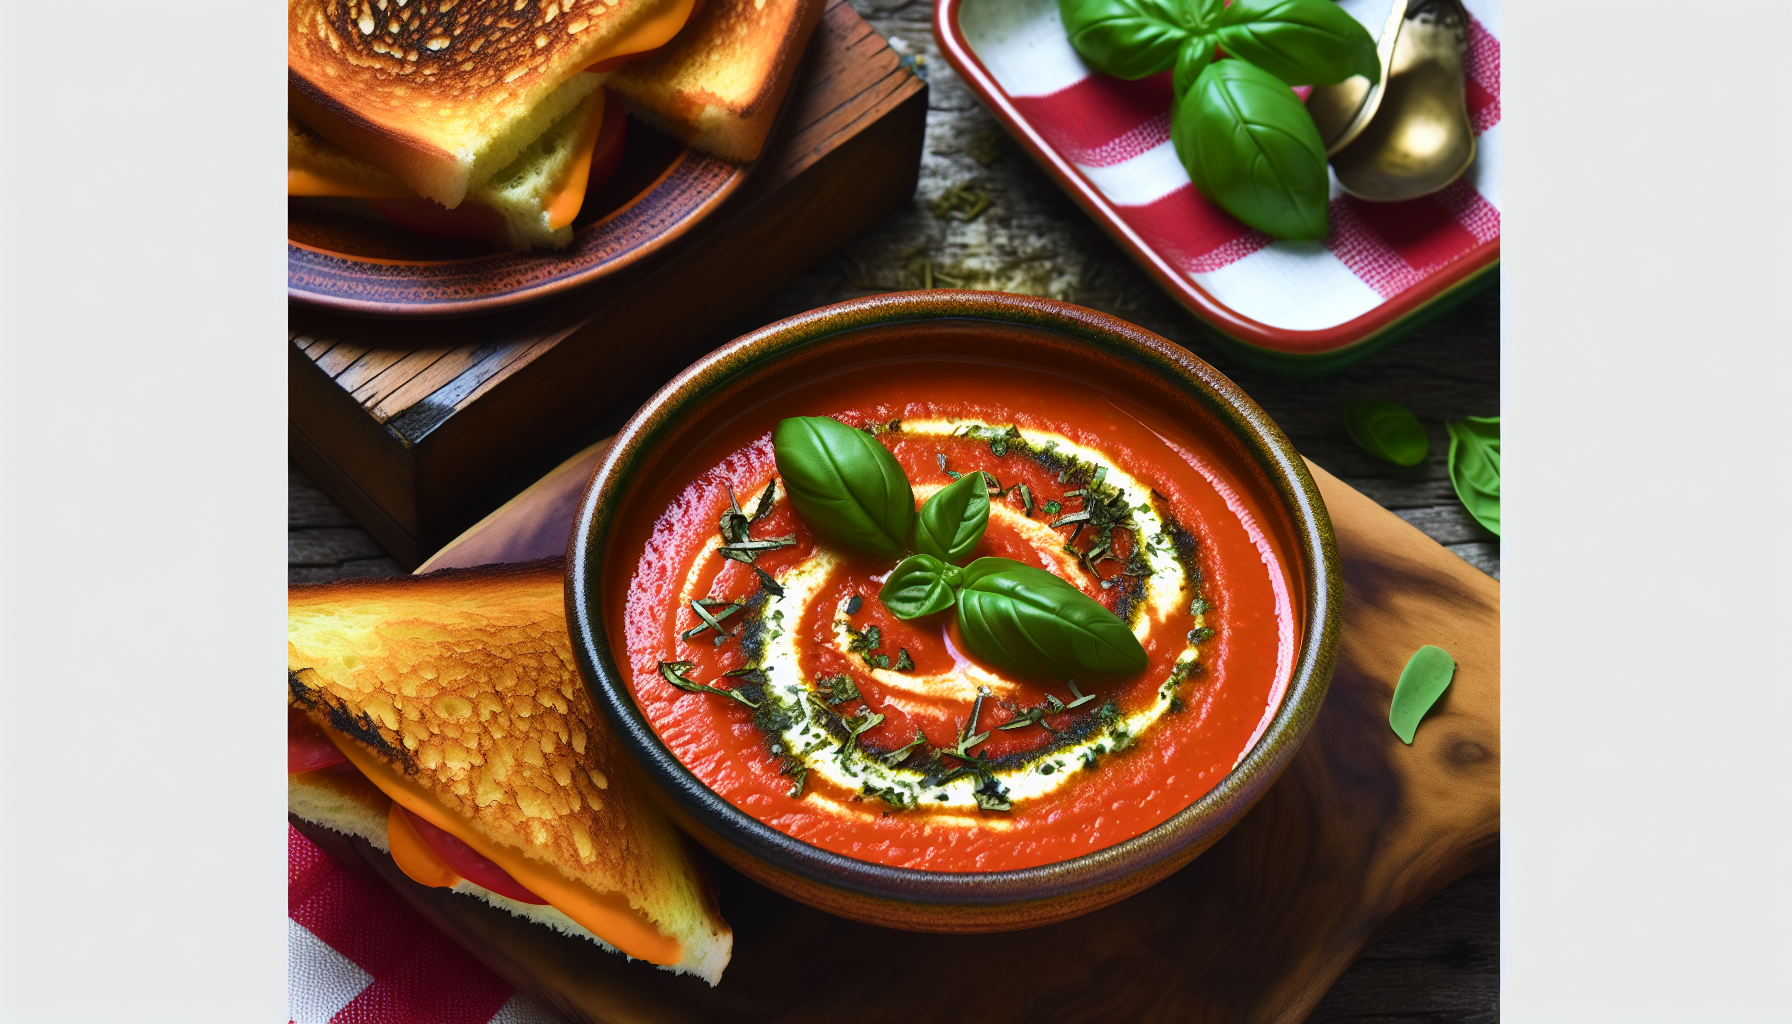 Delicious roasted tomato basil soup with grilled cheese